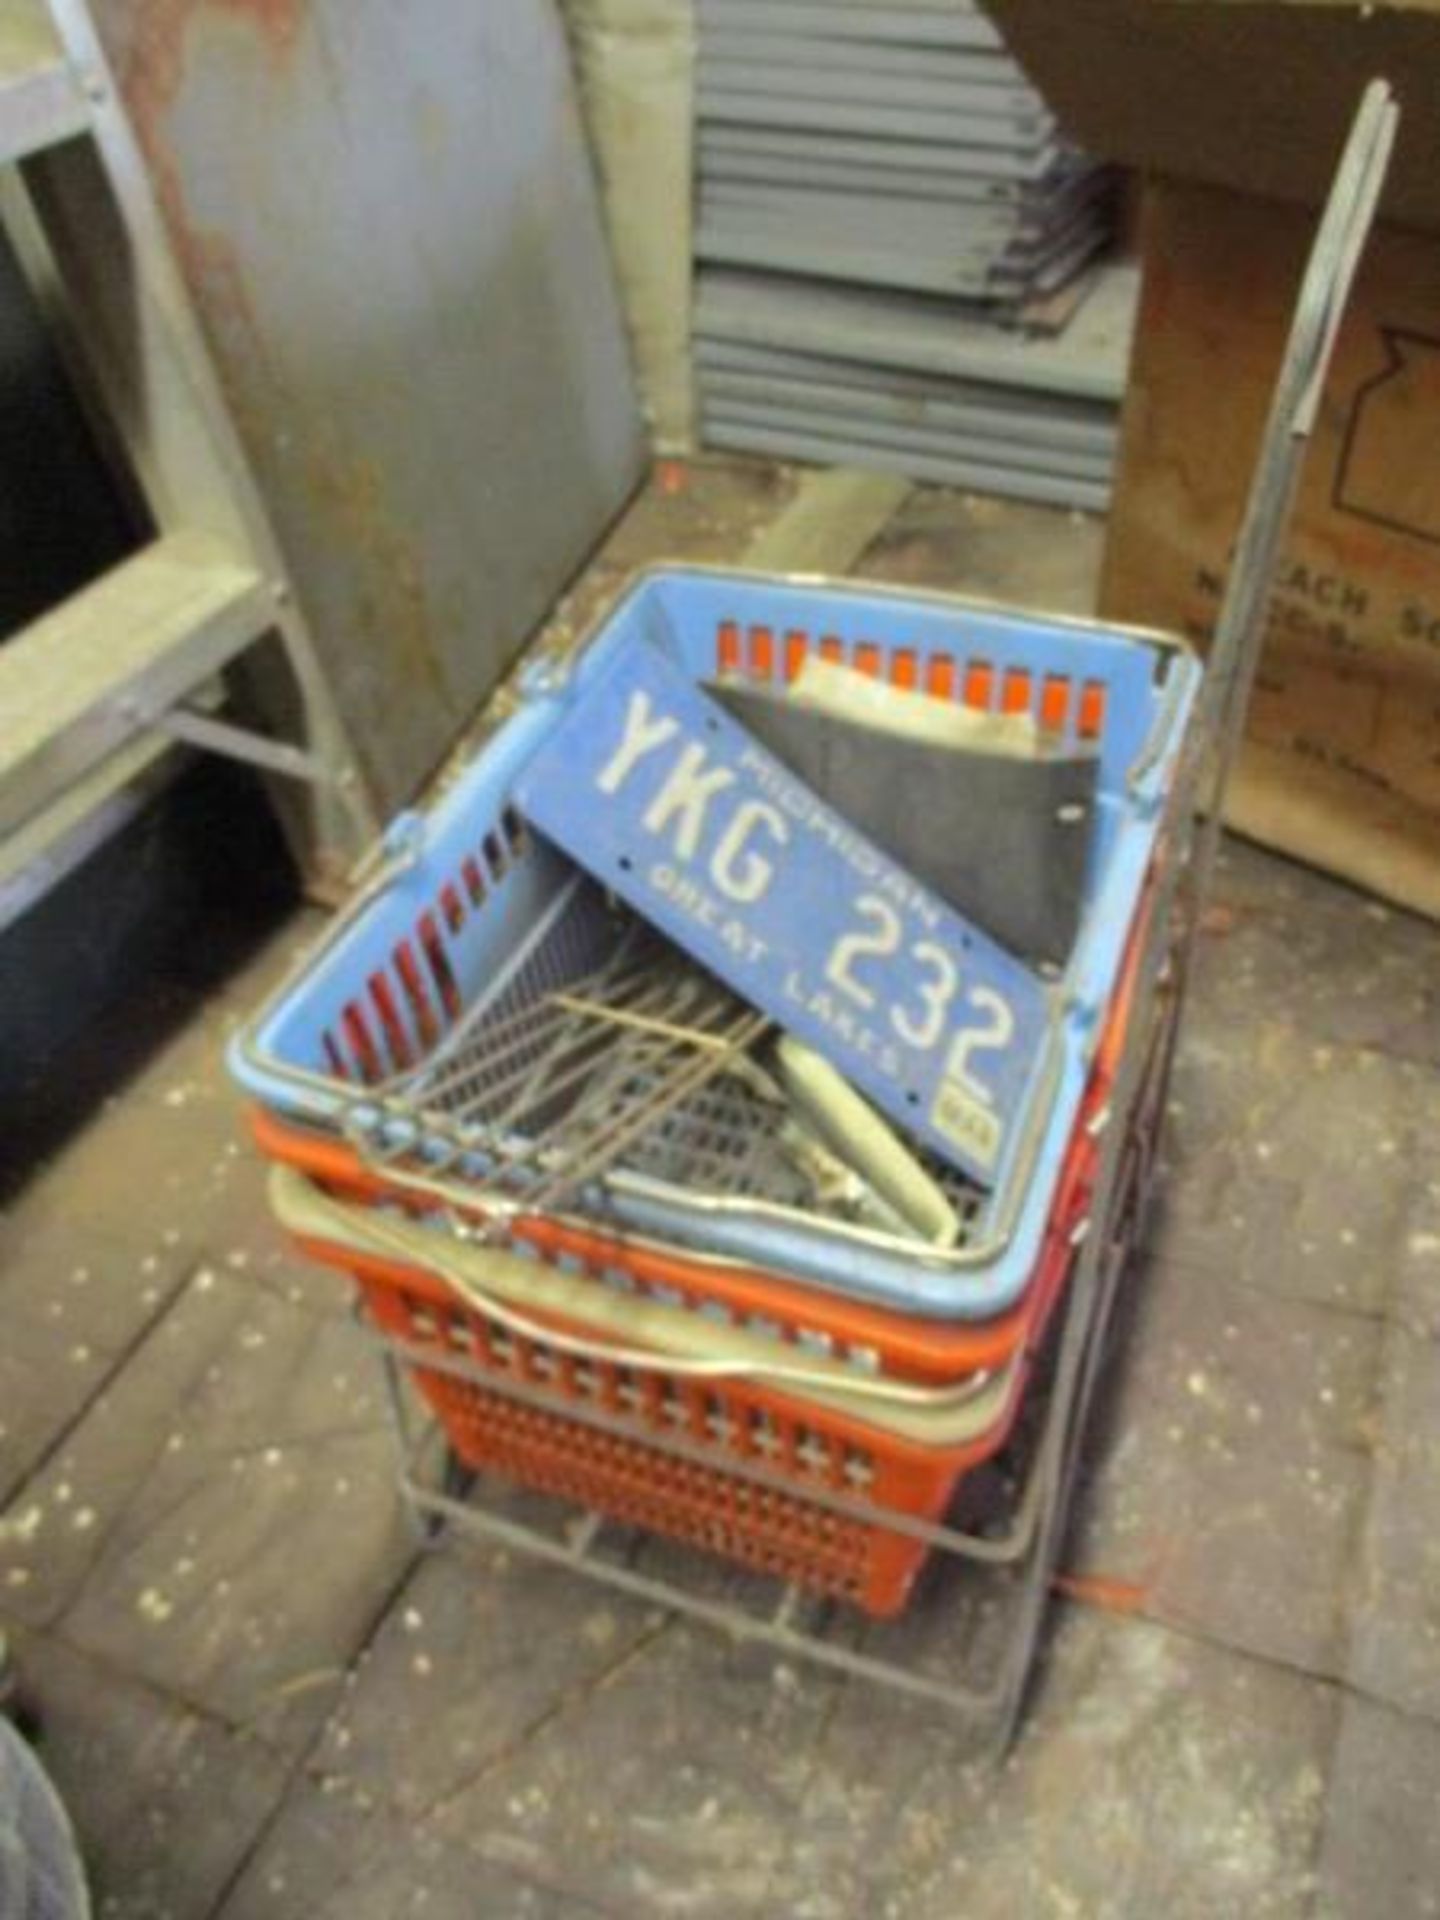 Galvanized Creeper Bucket on Wheels, Vintage Shopping Baskets and aluminum Step Ladder - Image 3 of 4